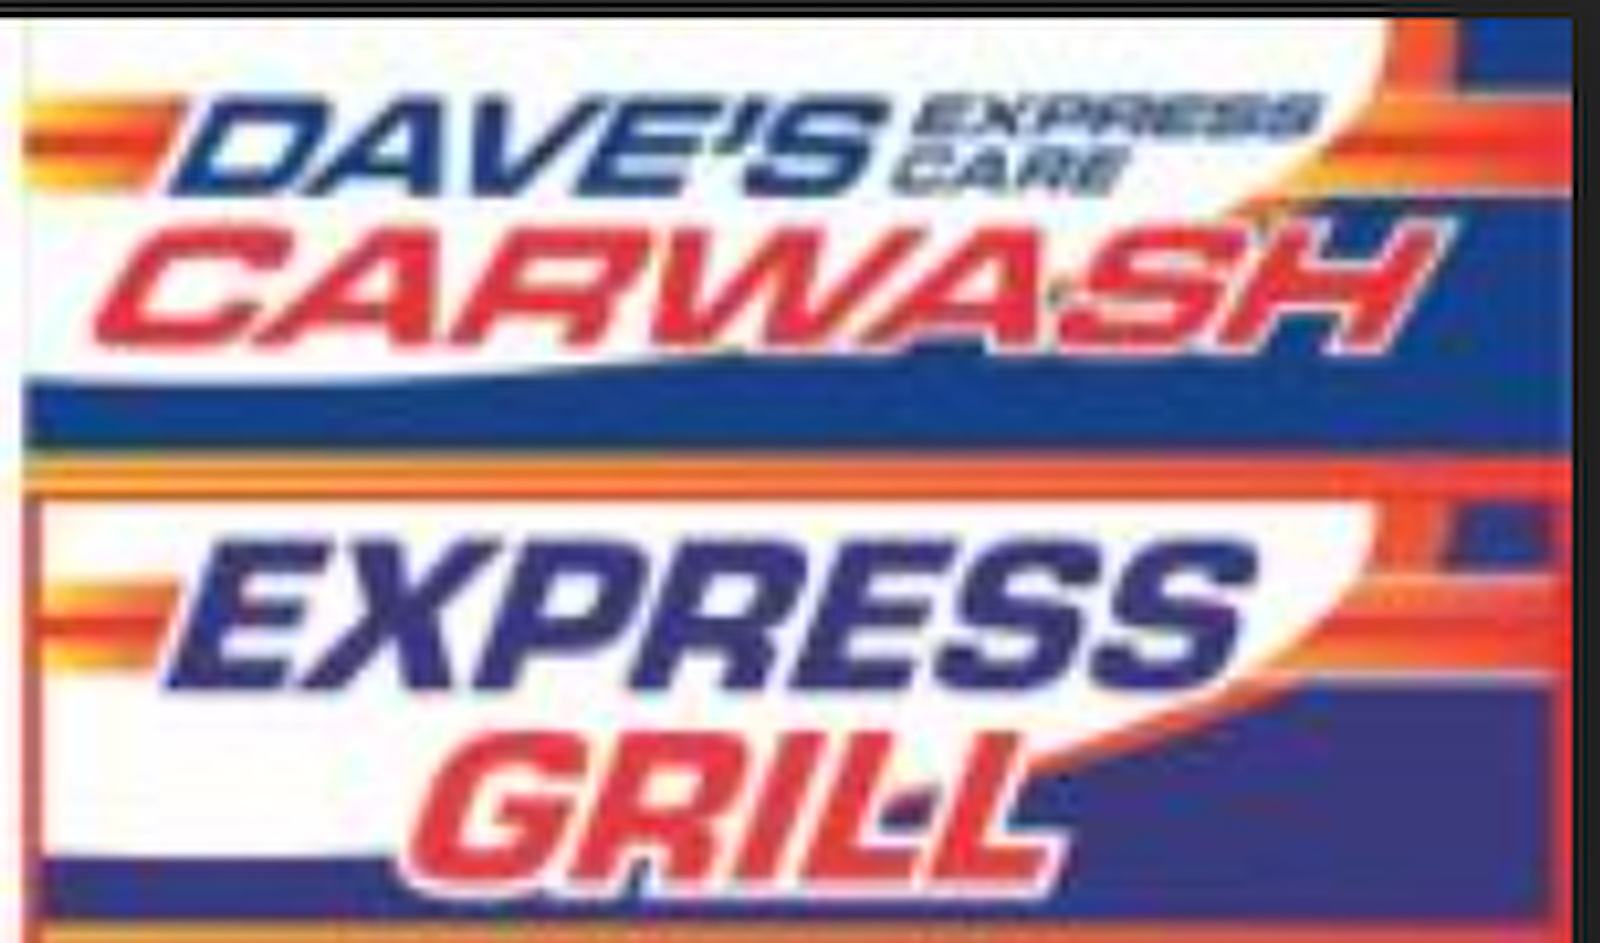 Dave's Carwash/Express Grill